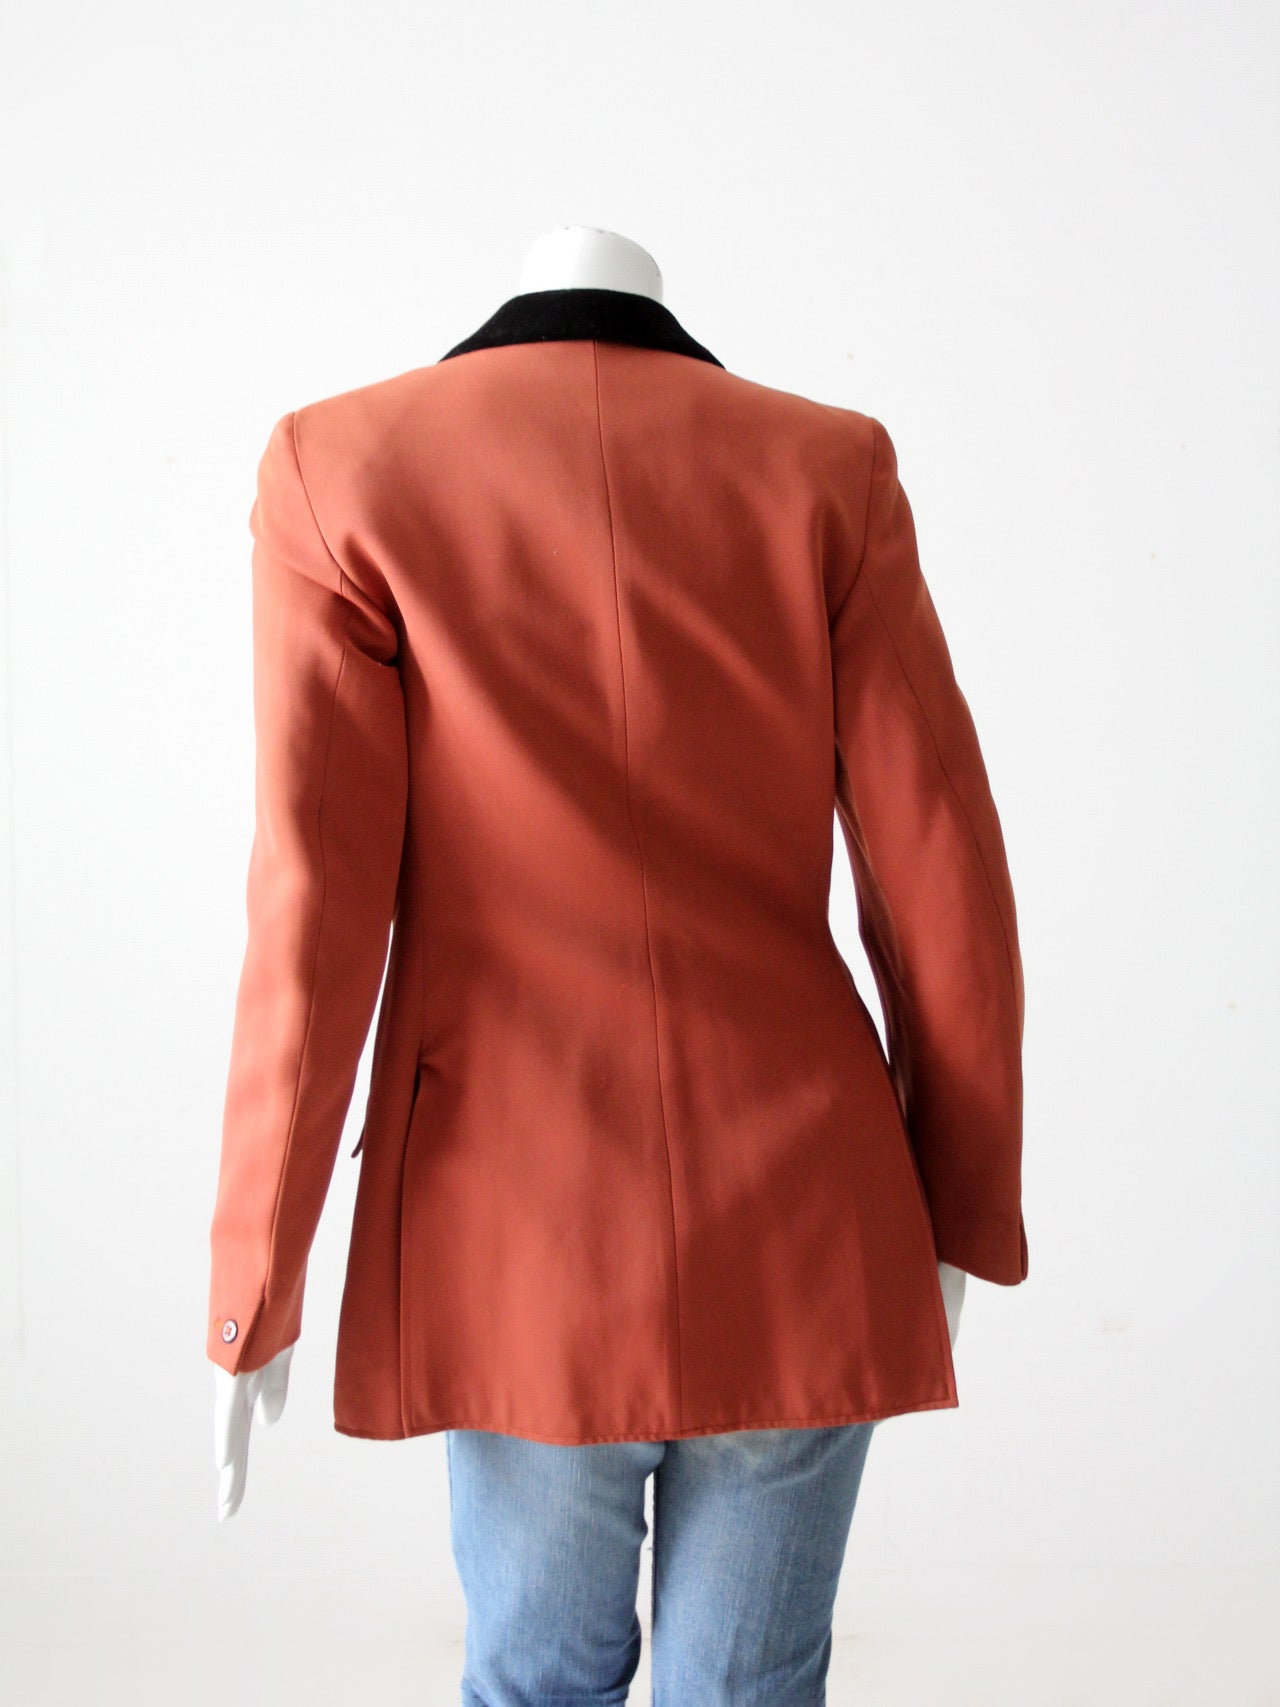 vintage 70s equestrian riding jacket by Harry Hall of London – 86 Vintage